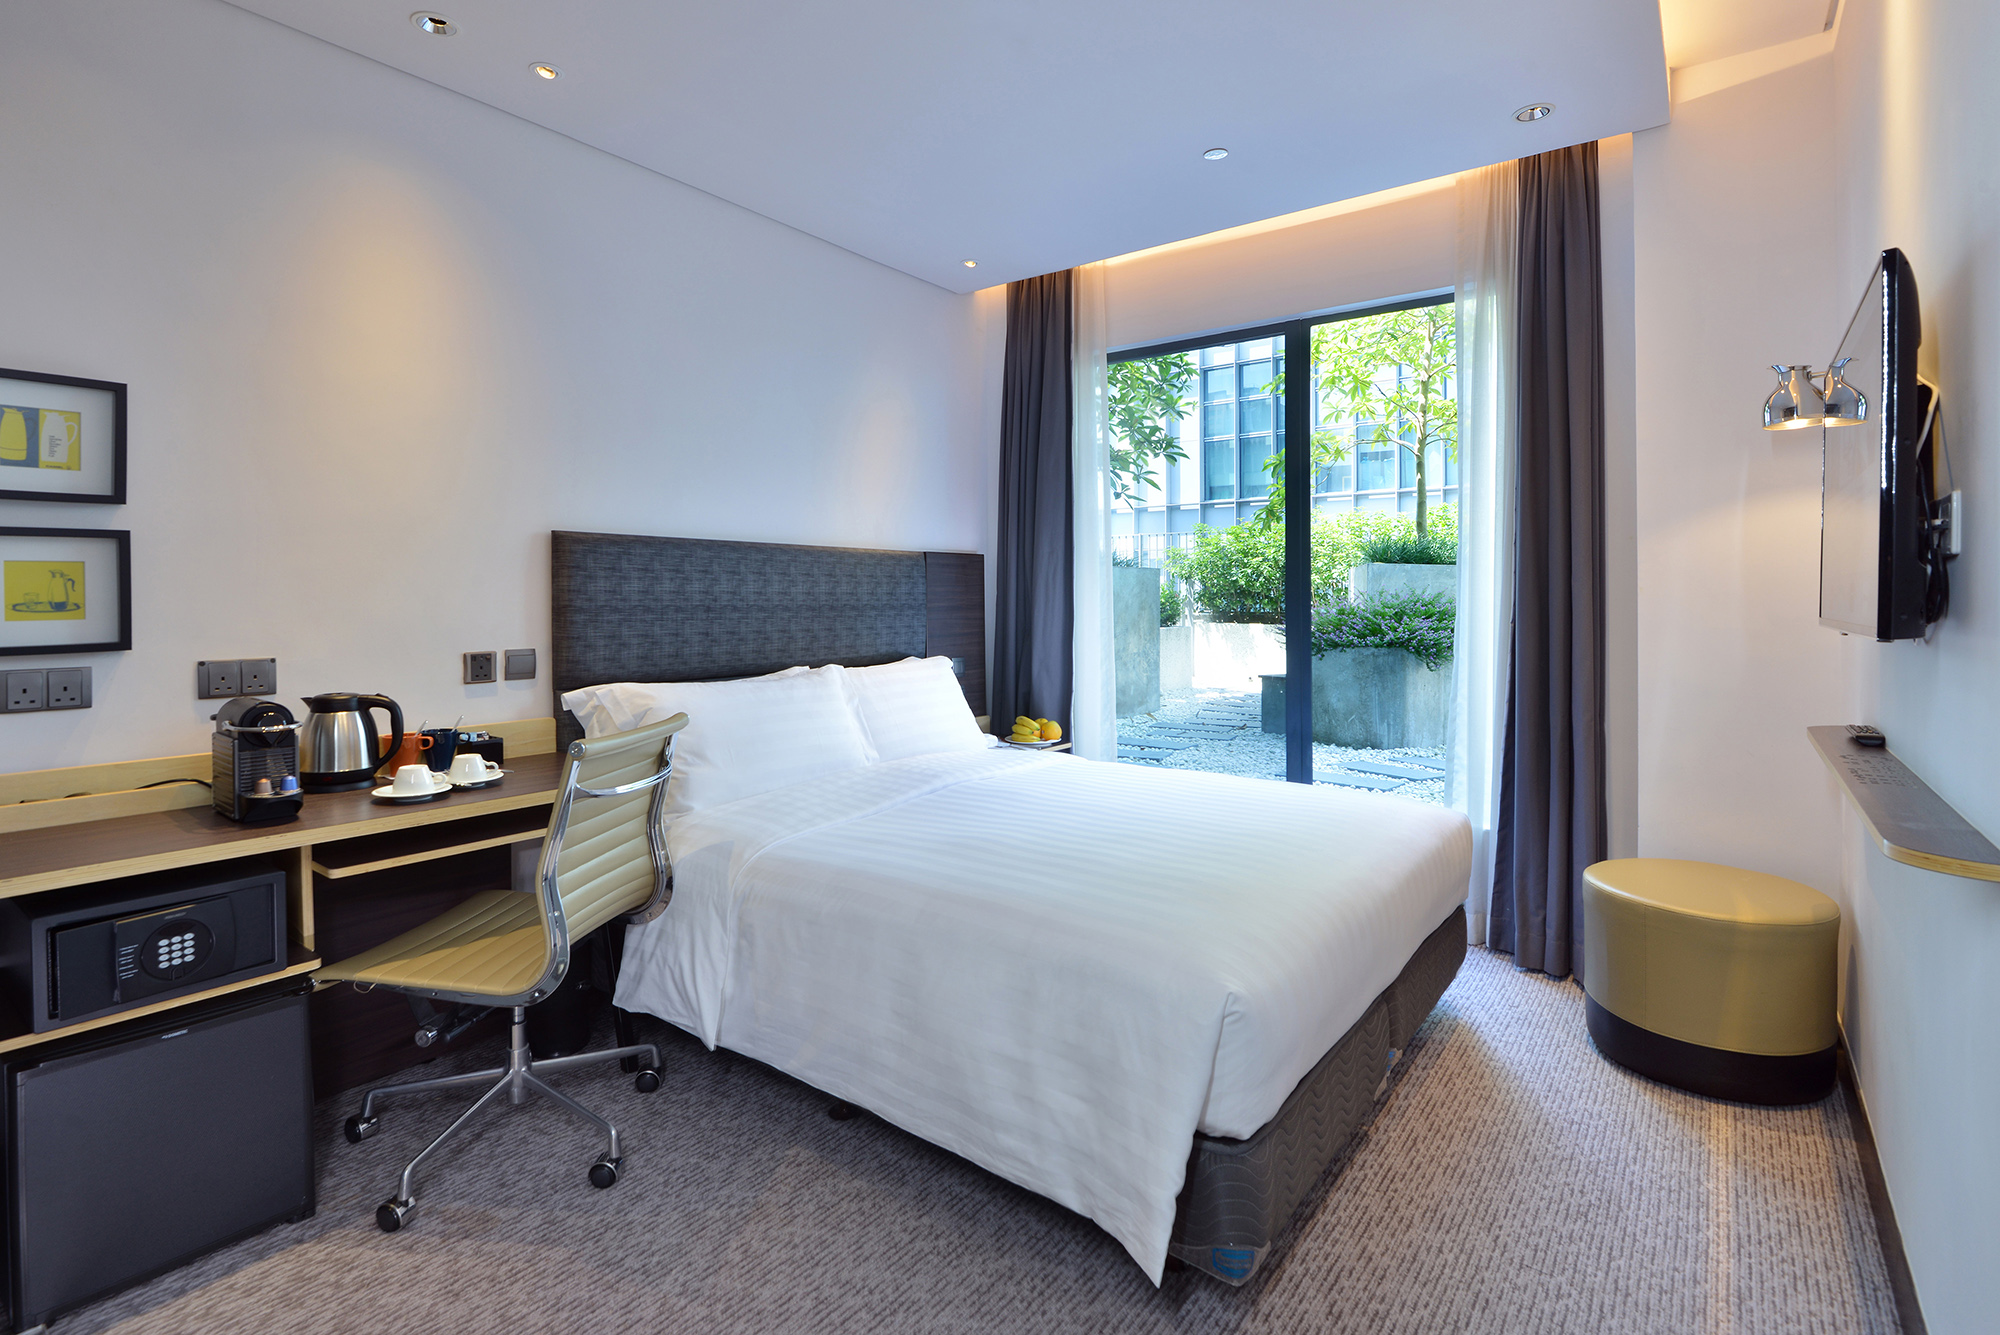 Hong Kong Hotel Bed And Breakfast Deals Camlux Hotel